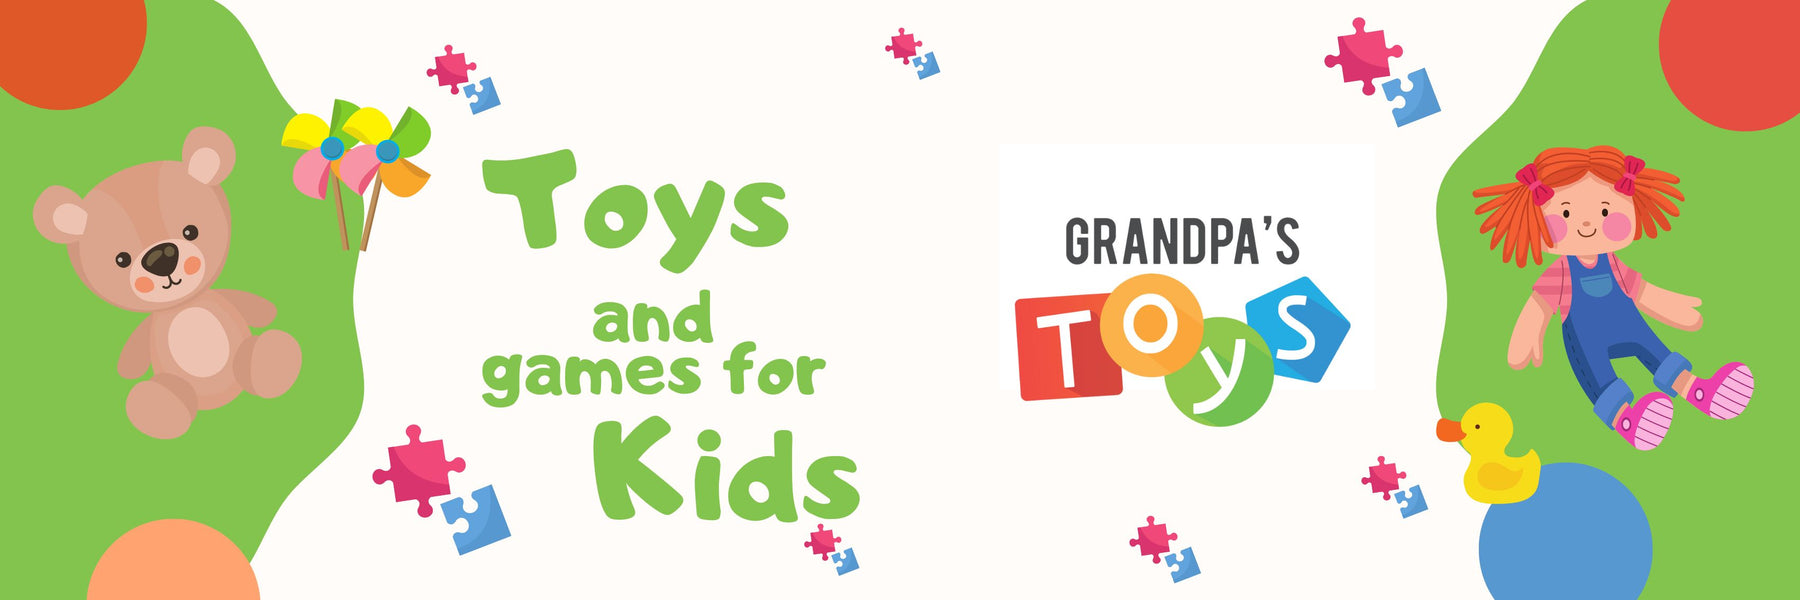 Grandpas Toys, the ultimate toy store for kids